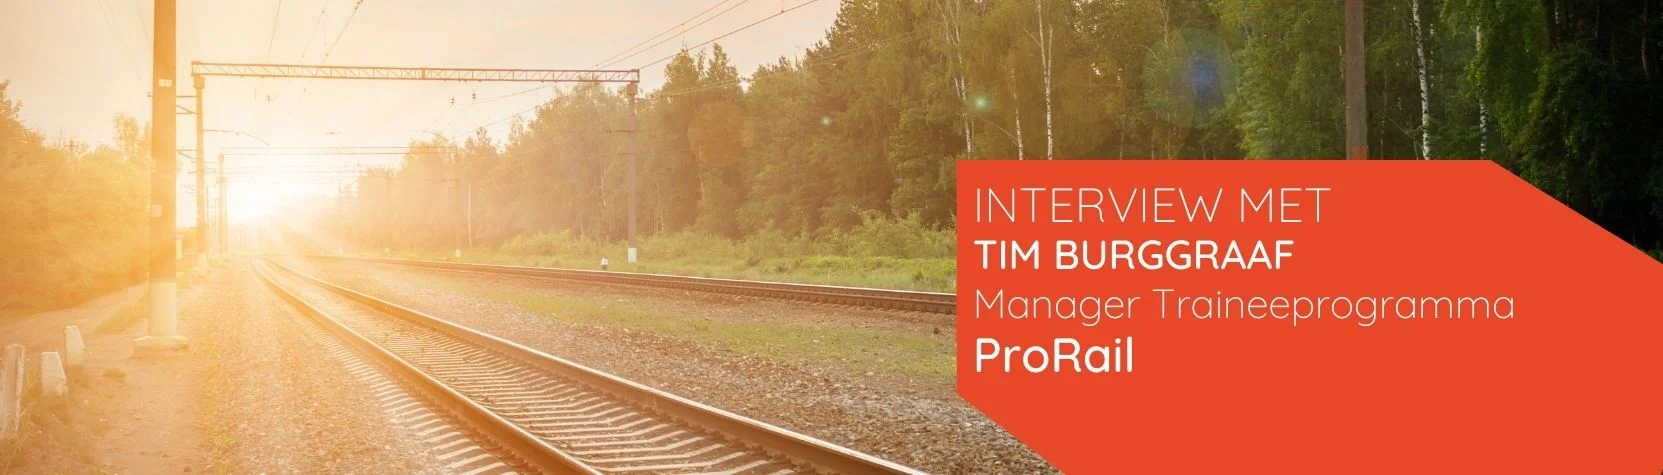 vds training consultants interview prorail tim burggraaf